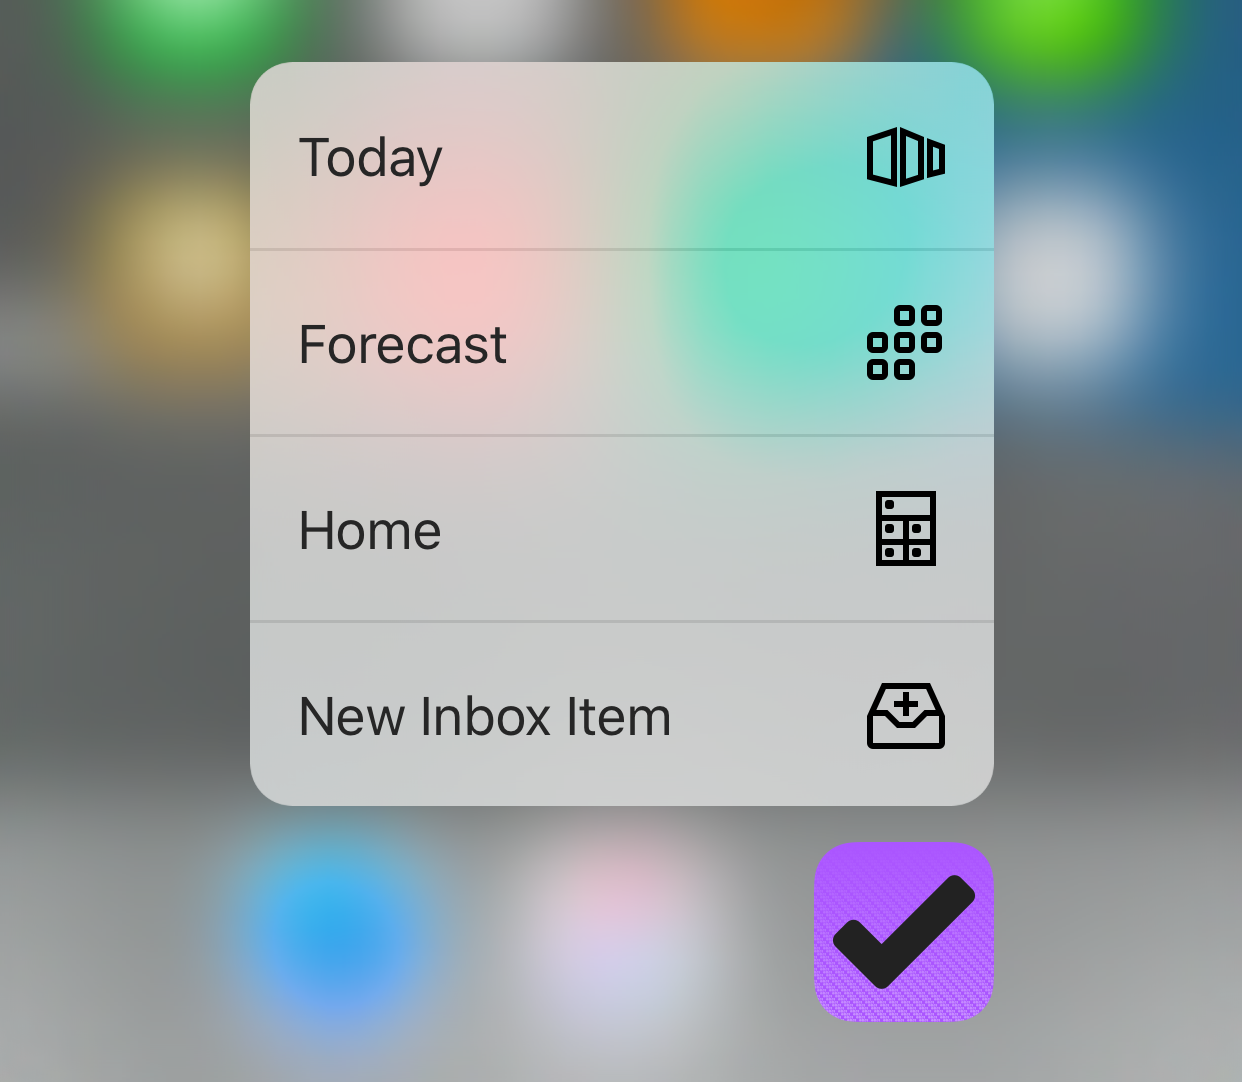 3D Touch from the OmniFocus for iOS app icon on the iOS home screen.